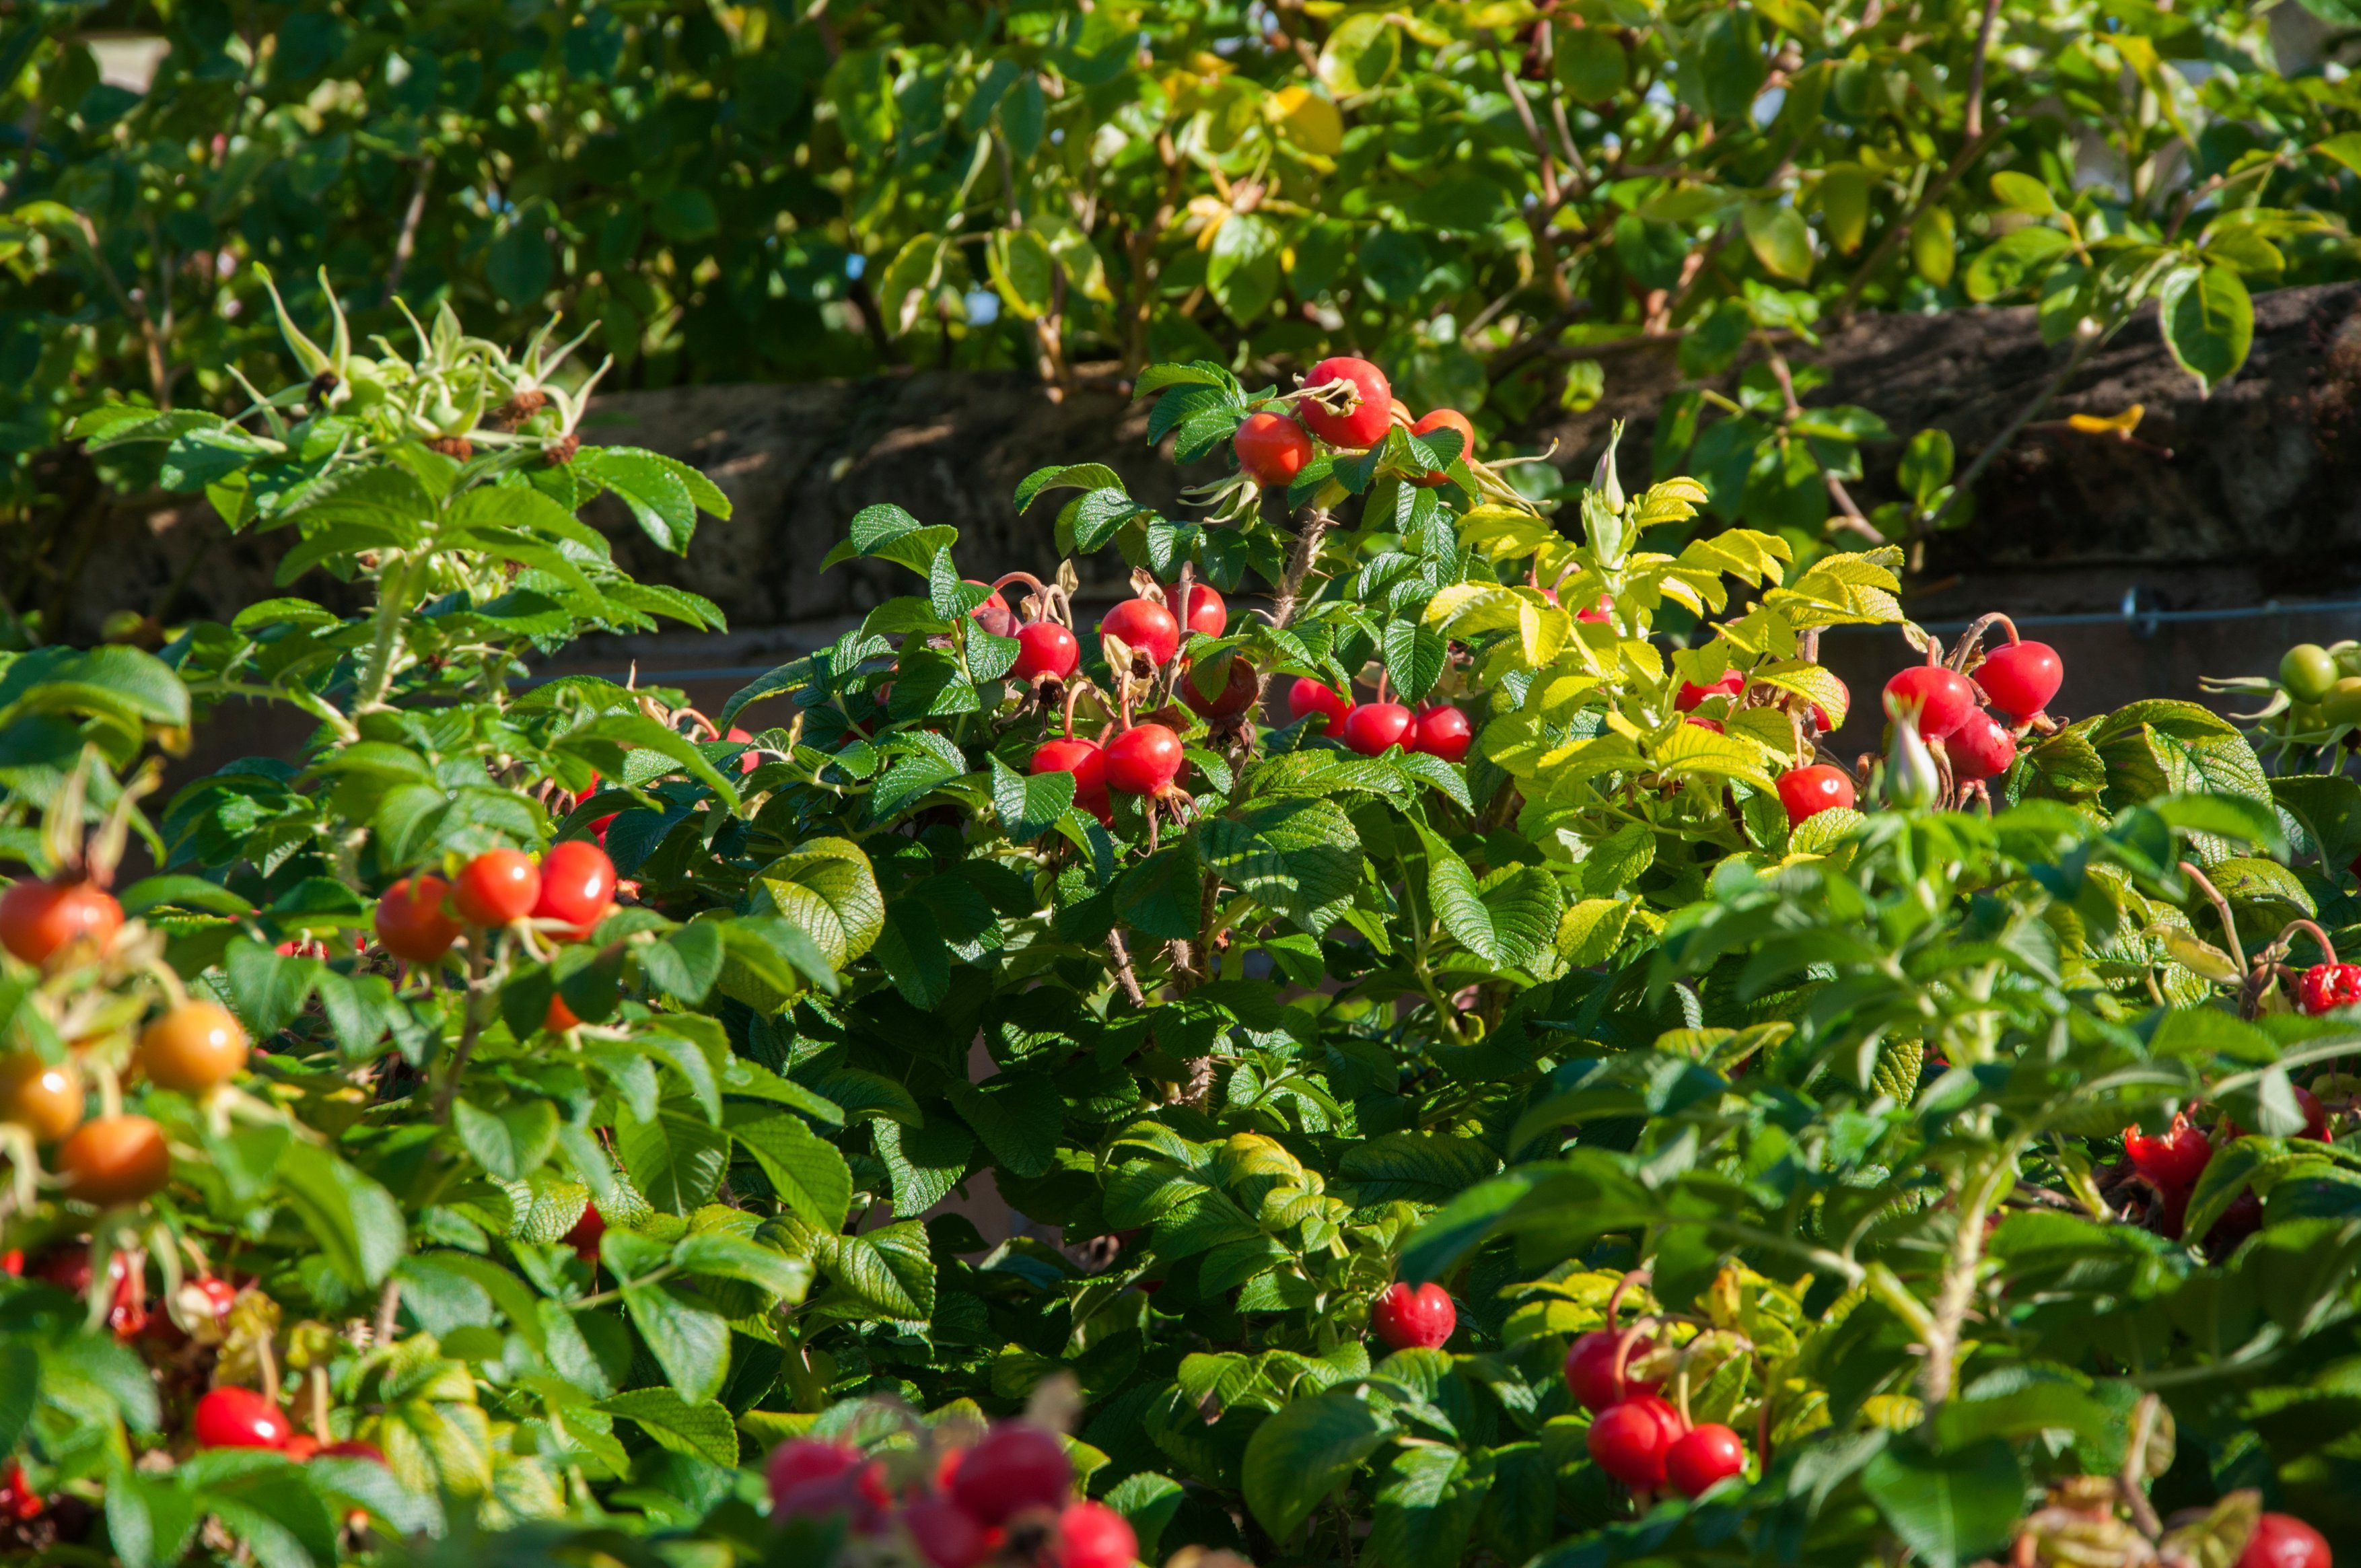 A Rosa rugosa hedge with red hips